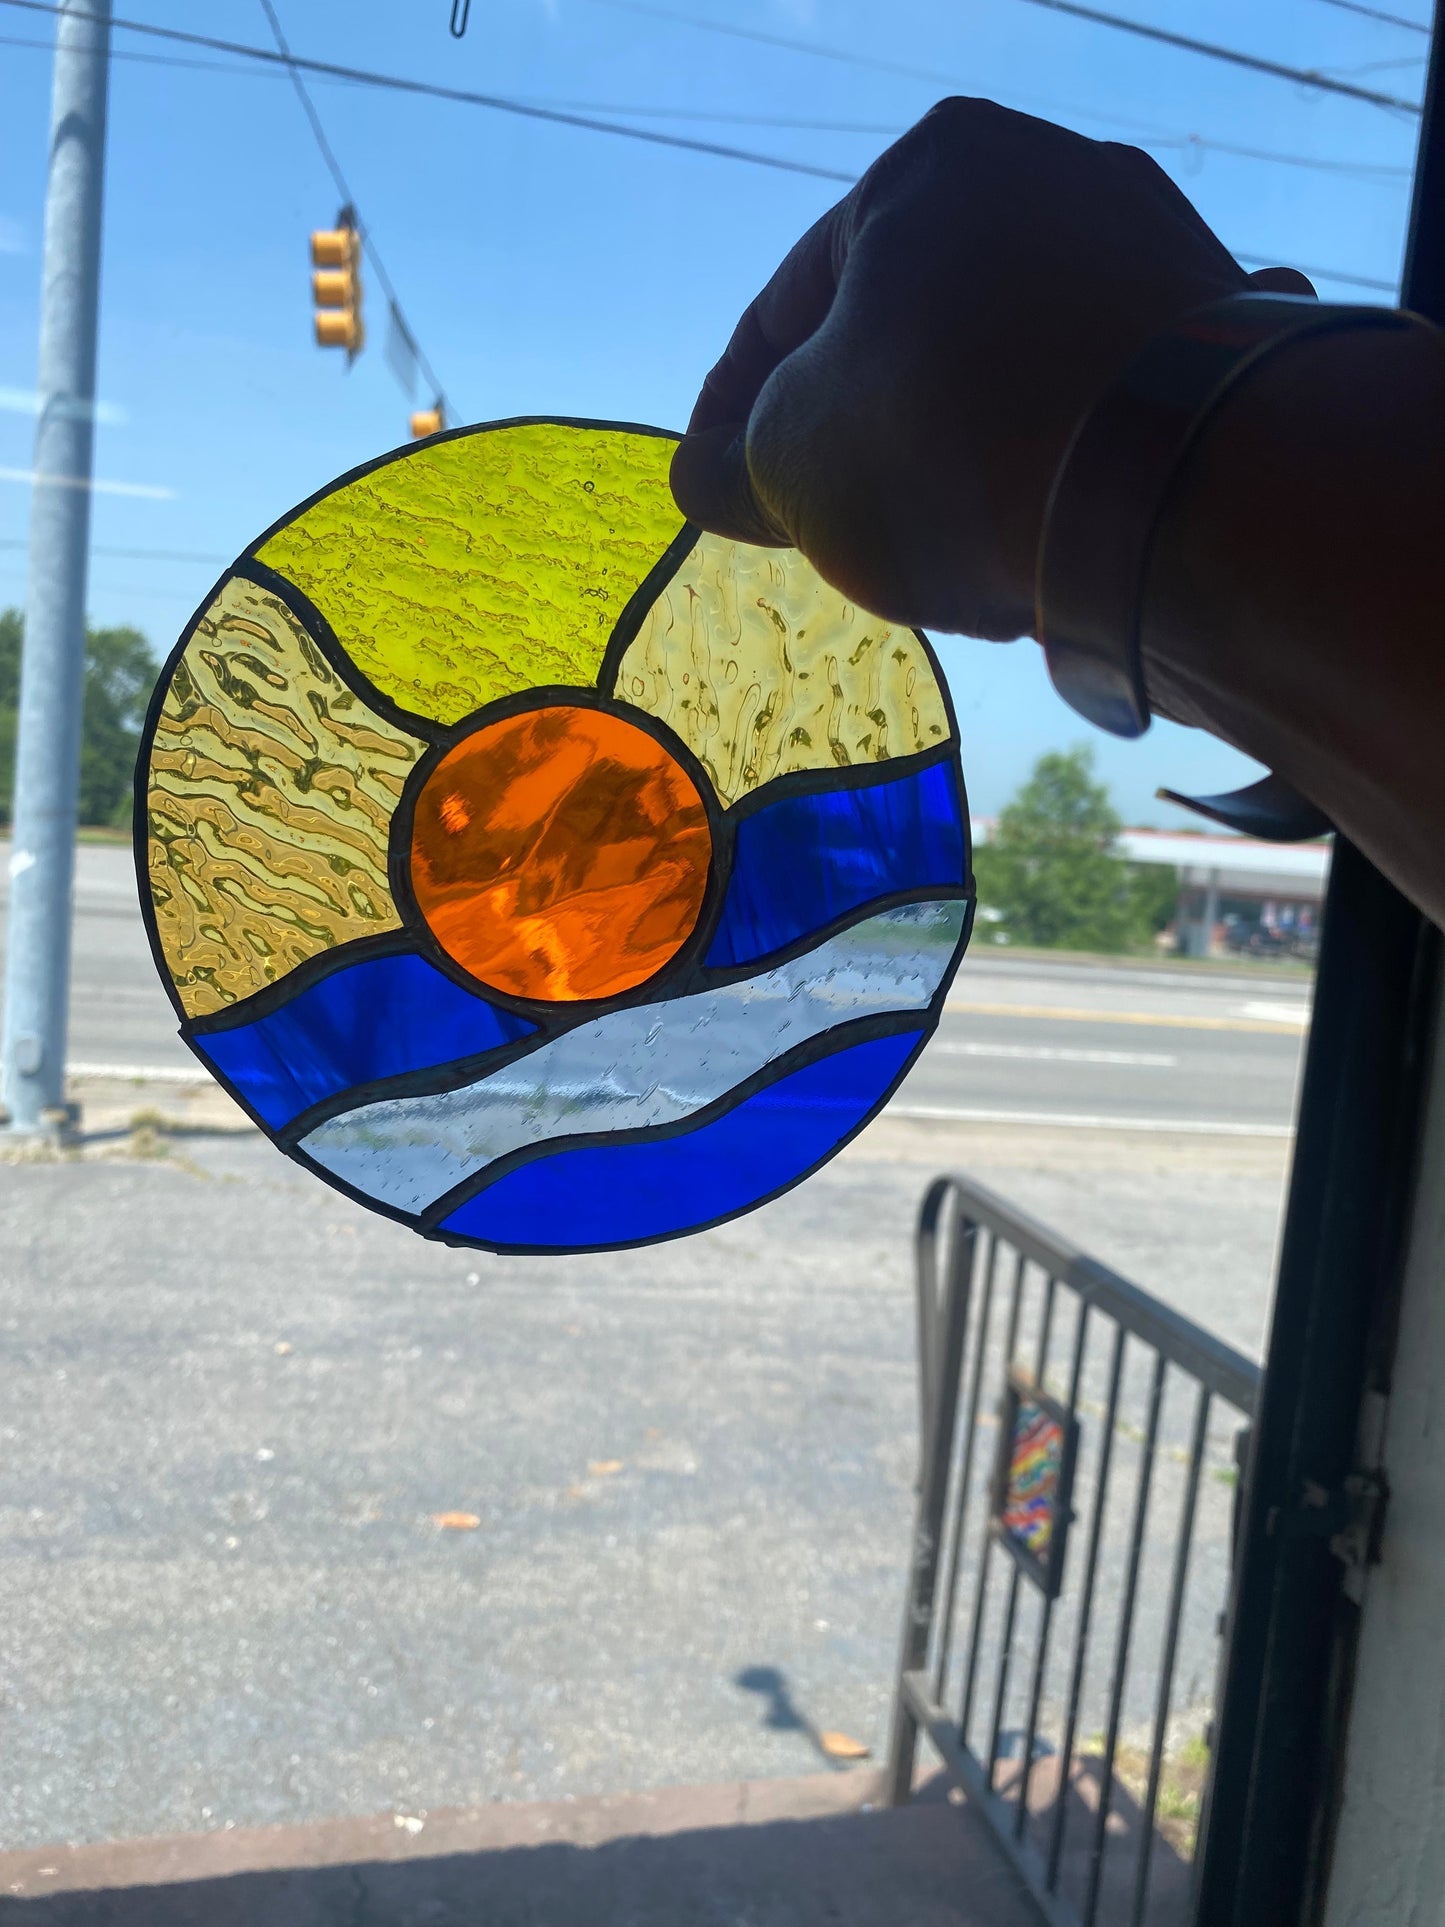 Beginner Stained Glass class,April 4, 11-1:30 pm